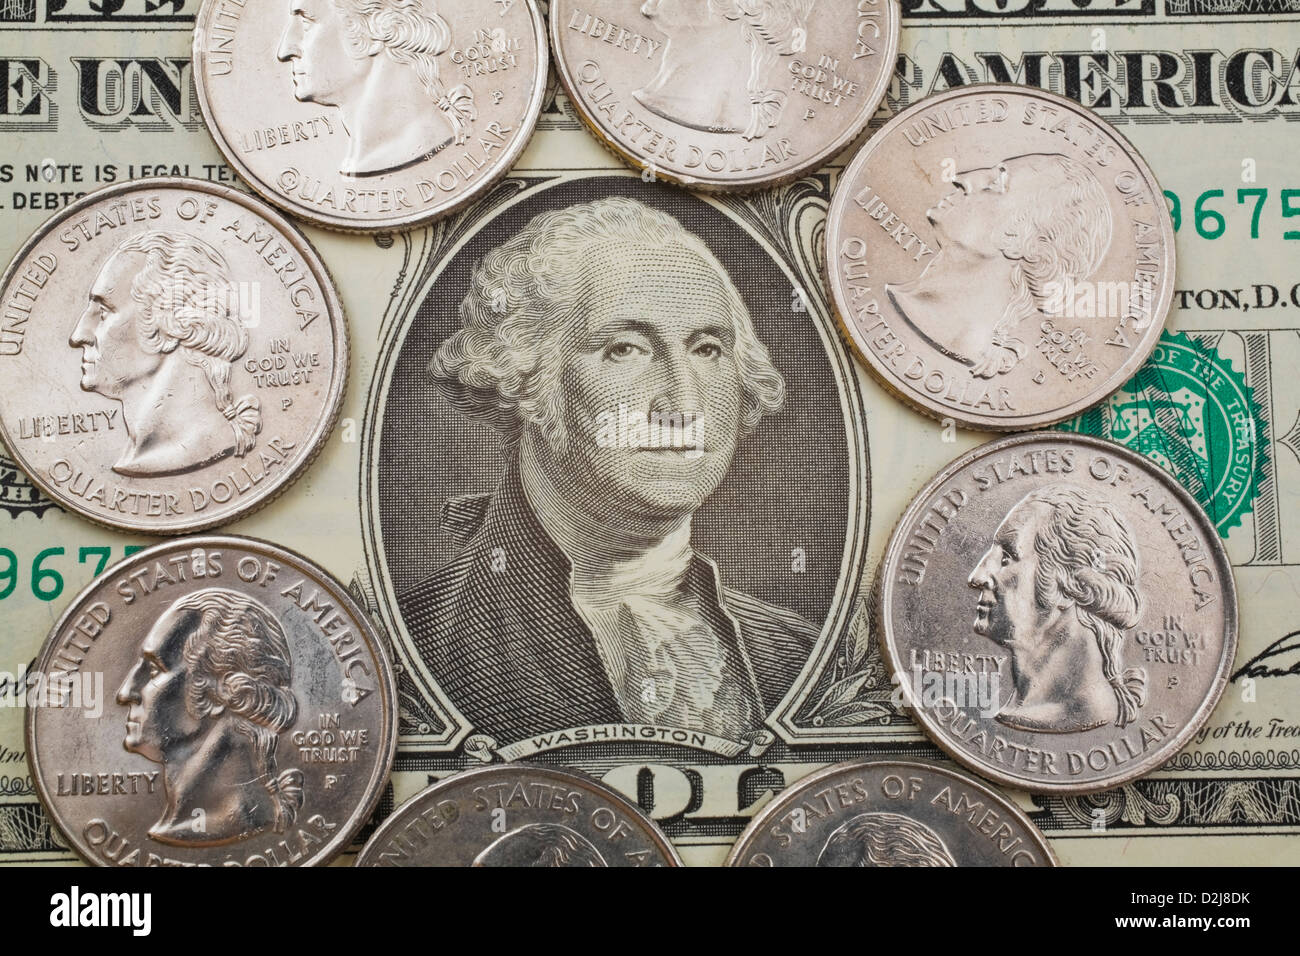 Portrait Of George Washington On A Us One Dollar Bill And Coins Stock Photo Alamy